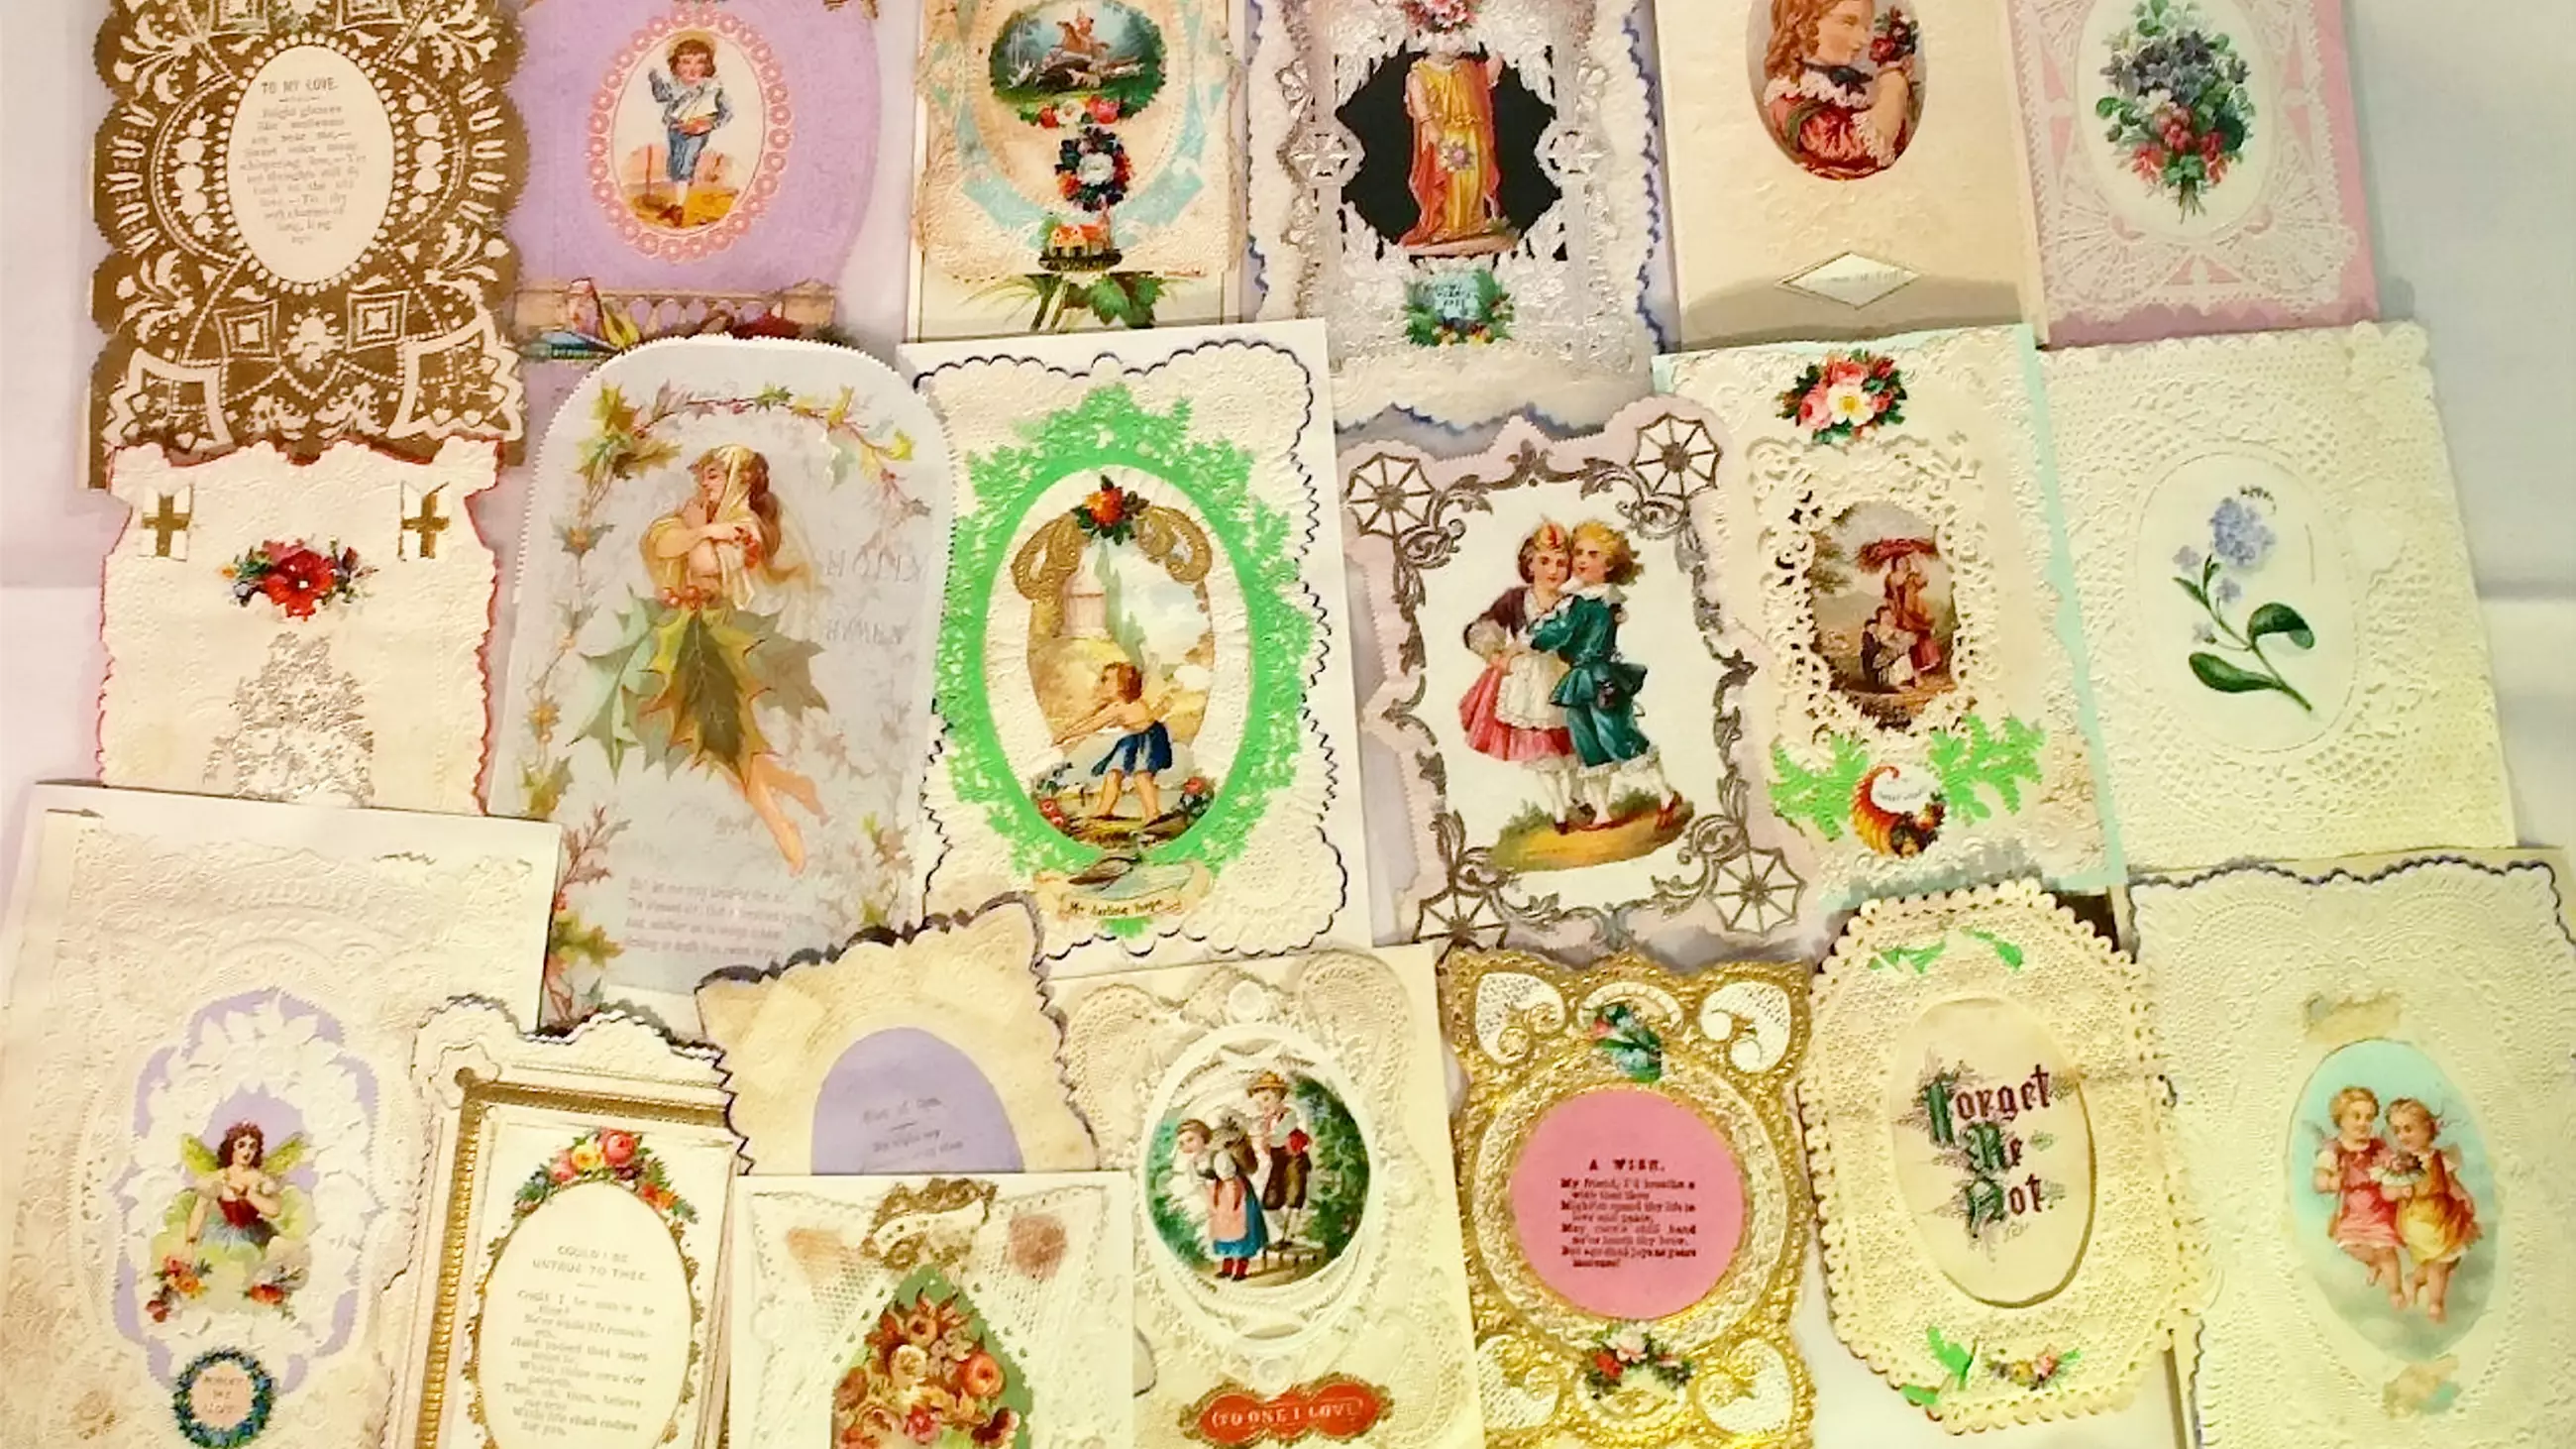 Victorian Valentine's Day Cards Found In Shoebox Give Lesson's In Romance